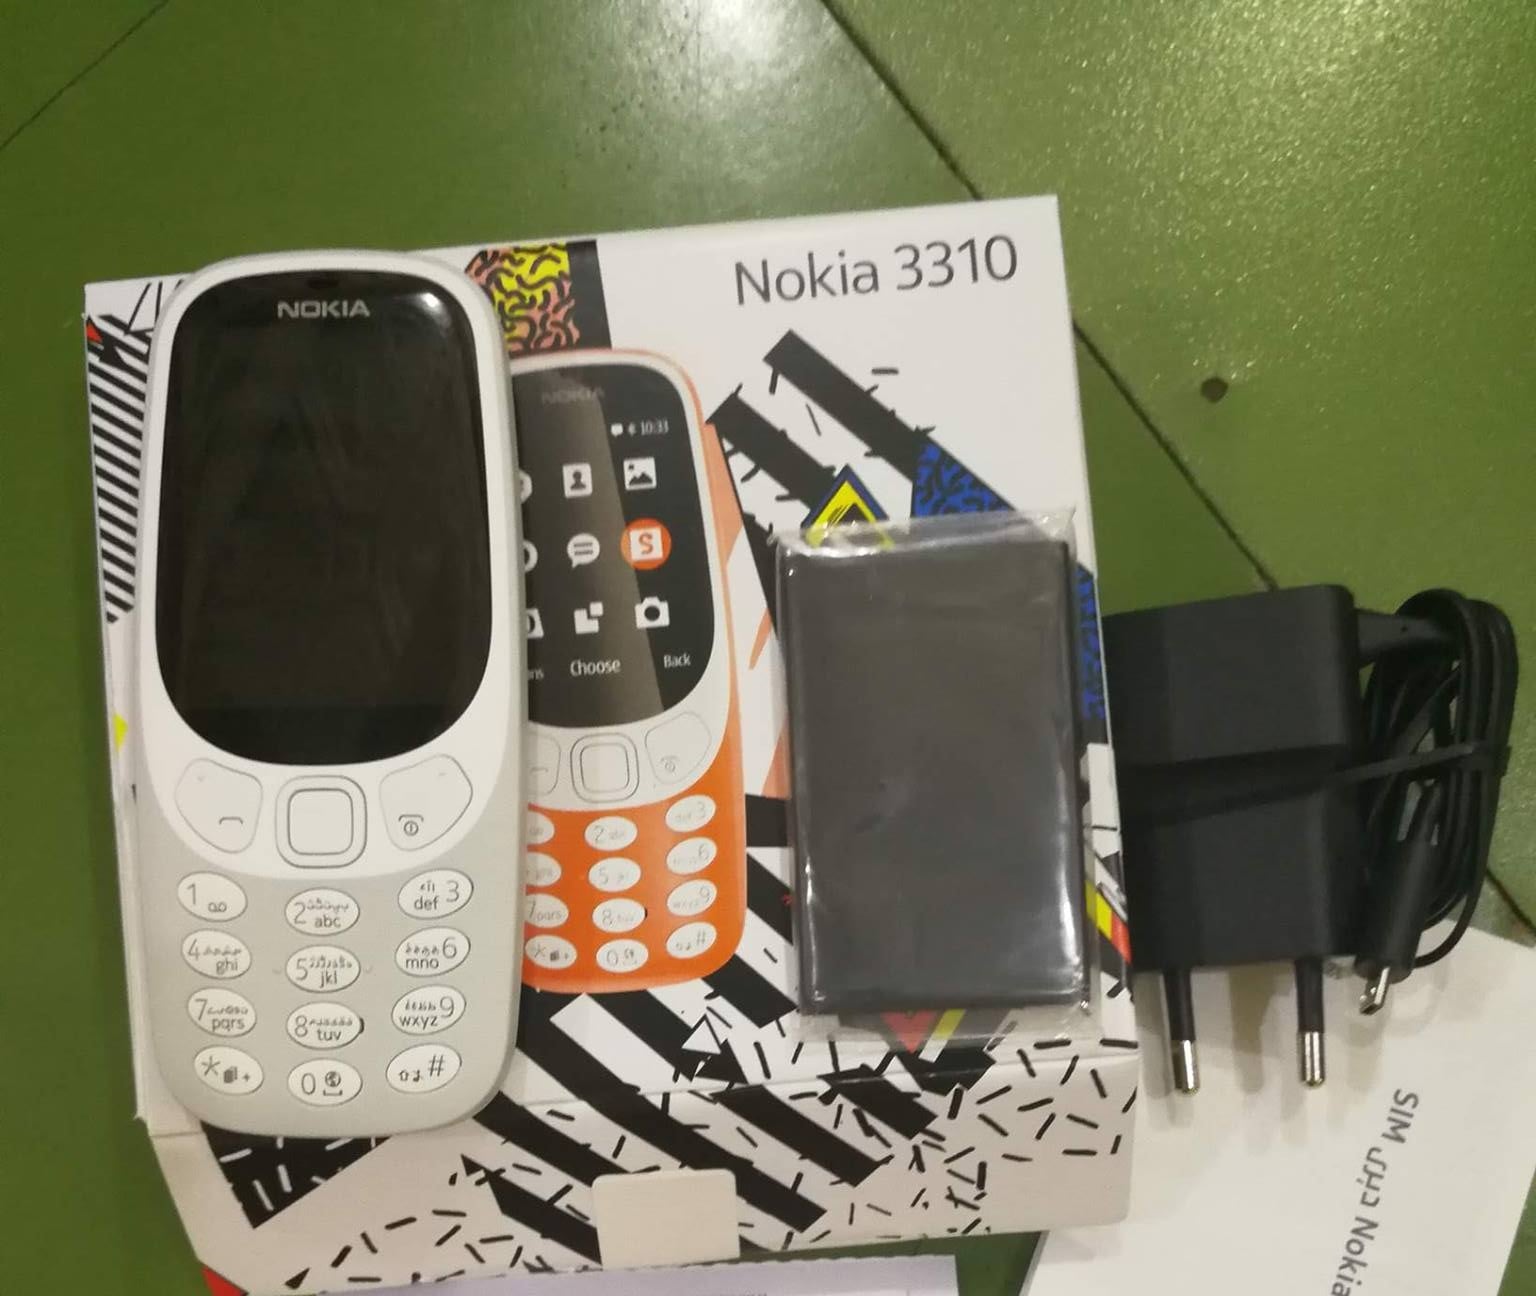 unboxing Nokia 3310 Hands On